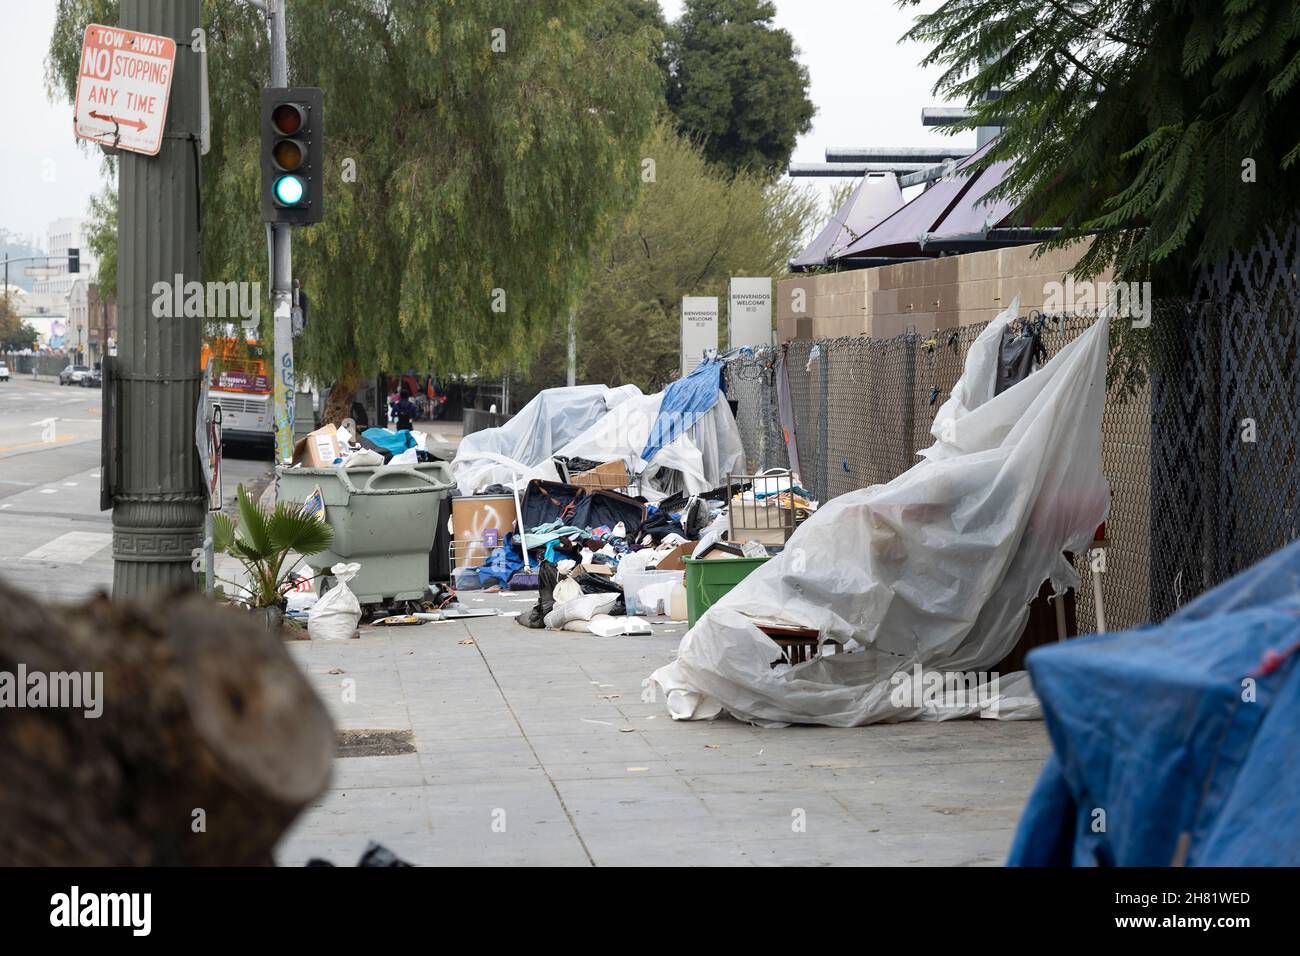 Los Angeles, CA USA - November 19, 2021: A homeless encampment on a sidewalk in downtown Los Angeles Stock Photo